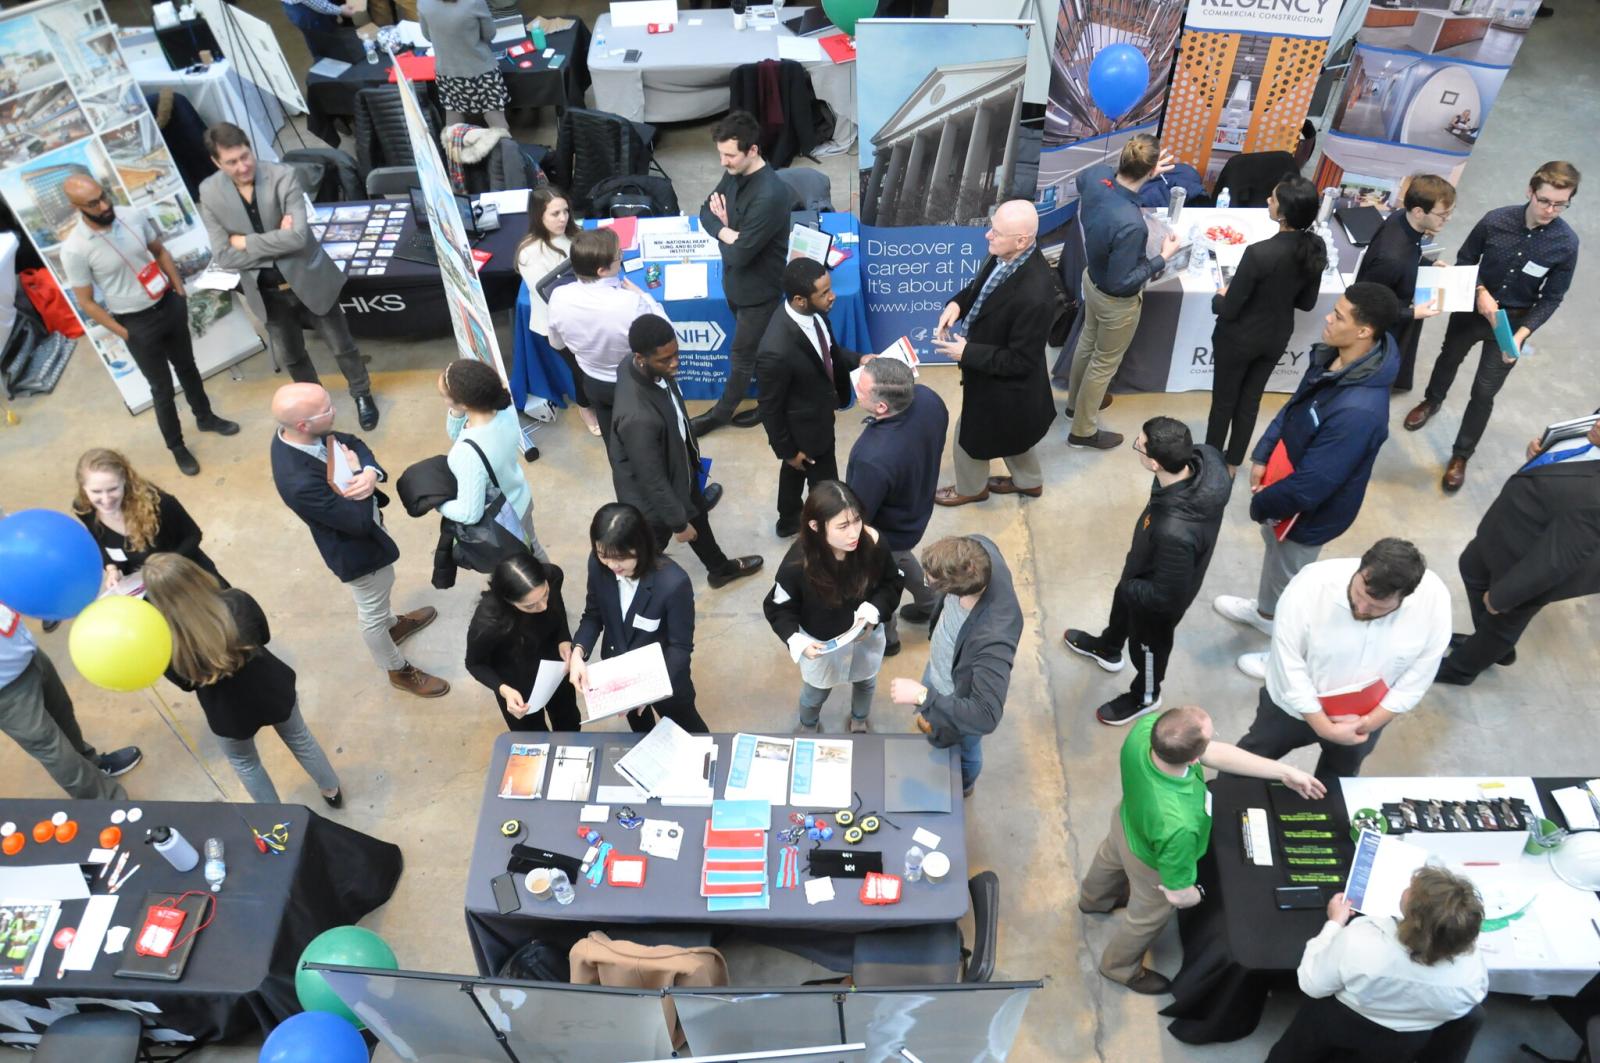 Career Fair view from the Mezzanine, down into the Great Space 